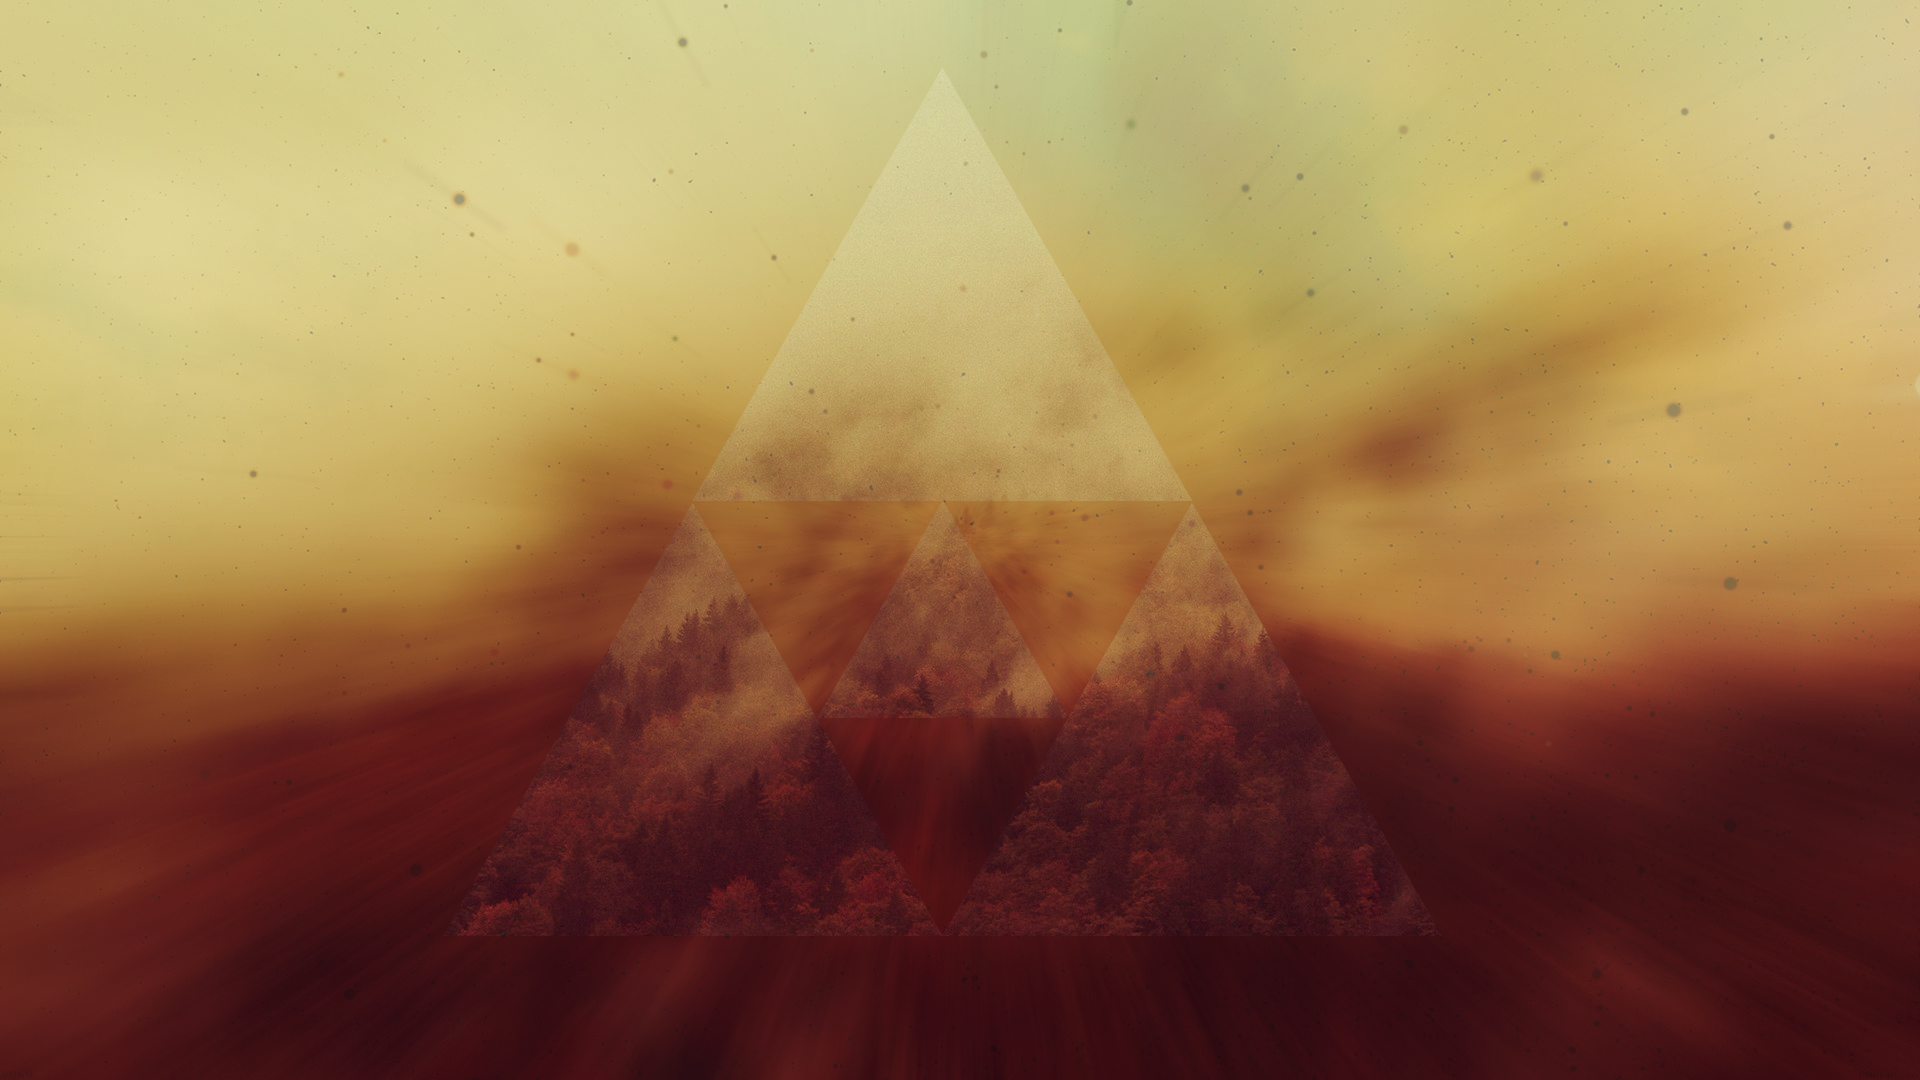 General 1920x1080 triangle nature digital art abstract